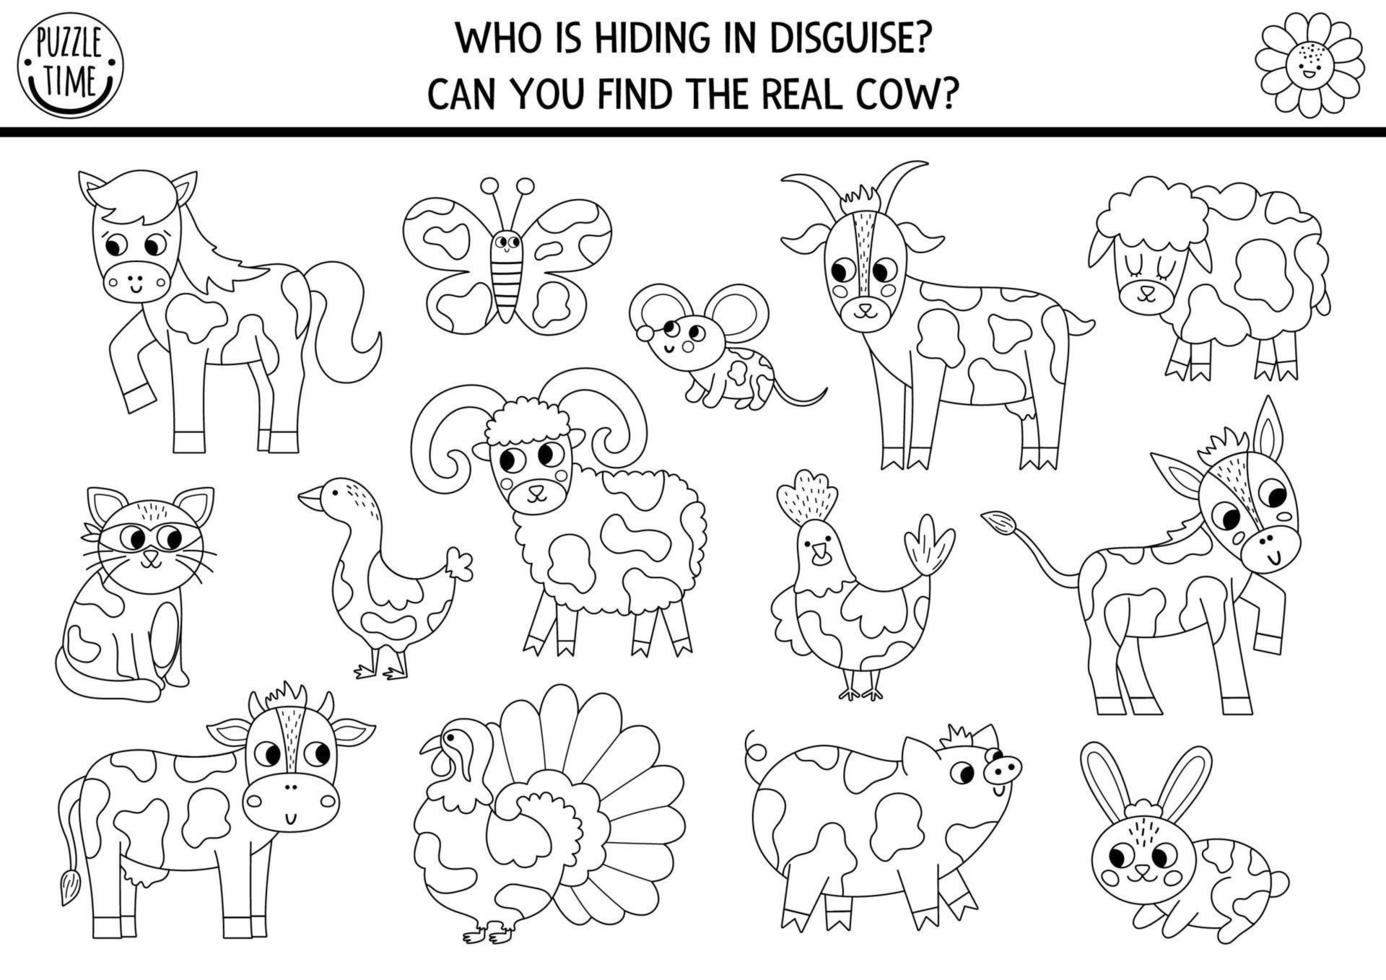 On the farm hide and seek game. Black and white farm matching activity for kids. Seek and find coloring page. Simple printable line game with cute animals. Who is hiding in disguise. Find the real cow vector